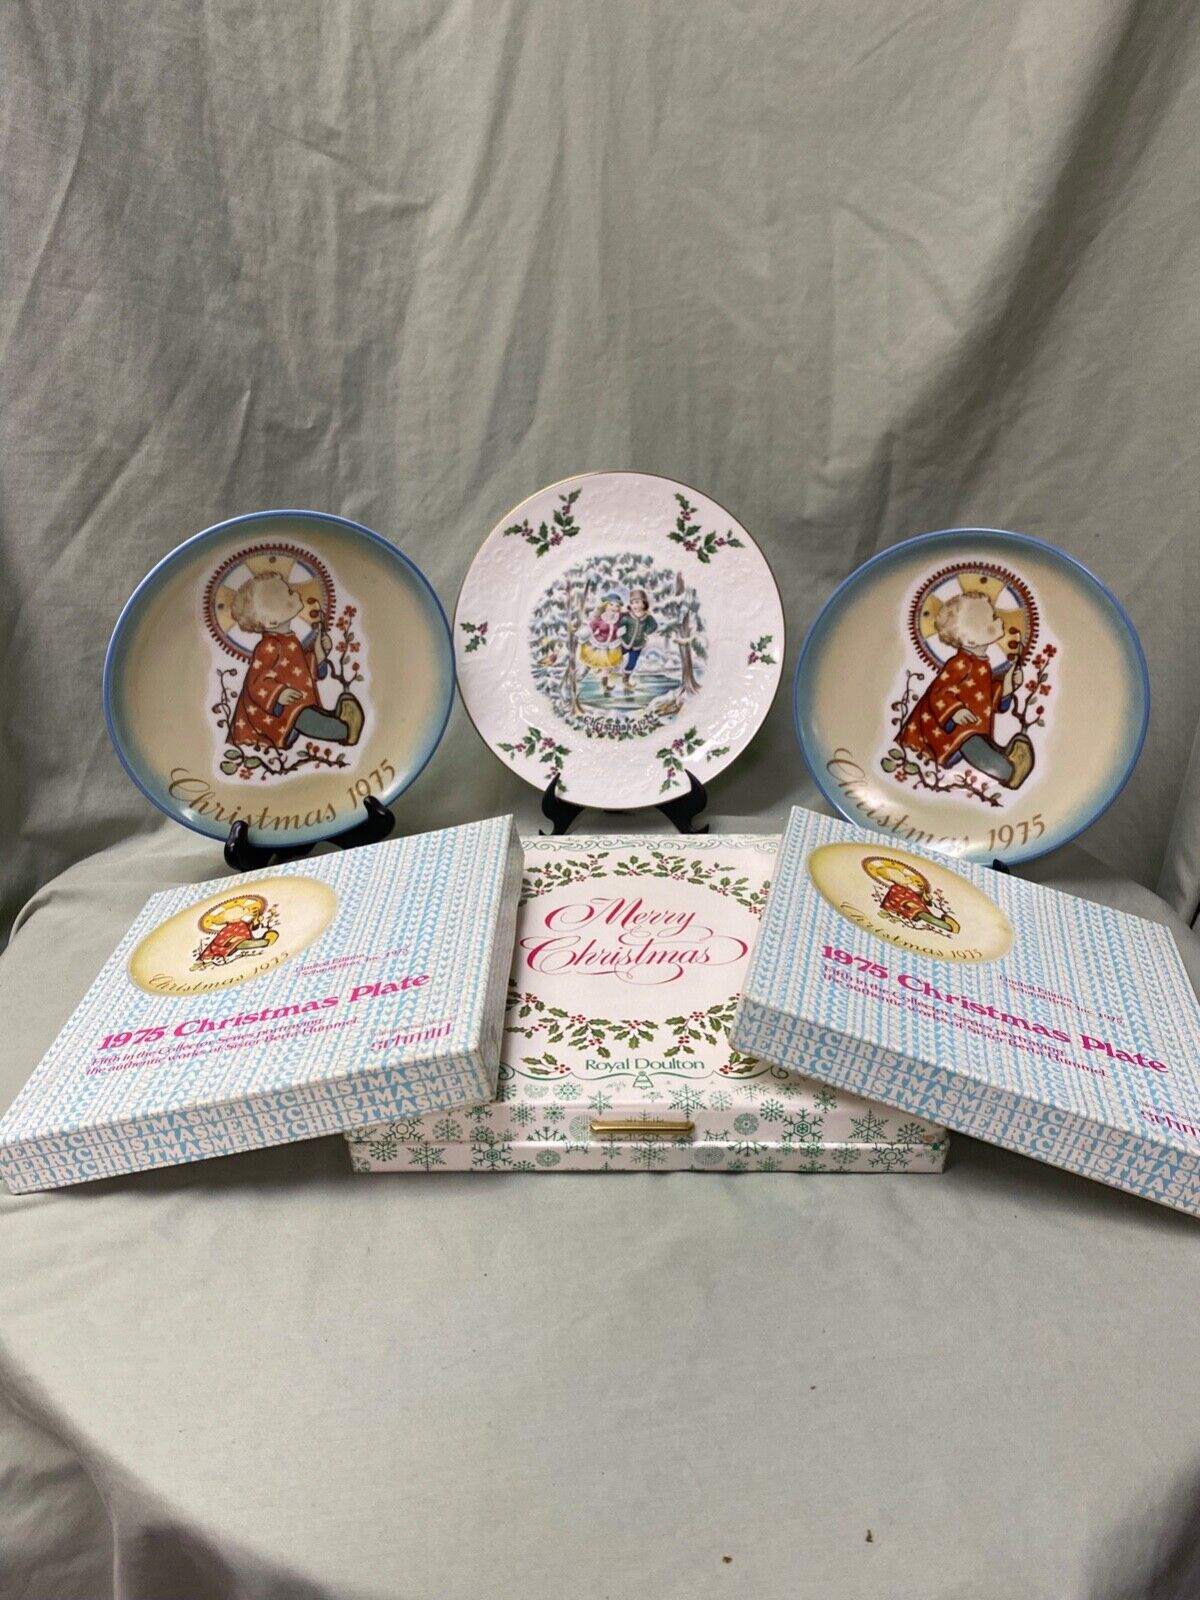 Two vintage Sister Bertha Hummel xmas plates (1975) plus one from 1977. Perfect